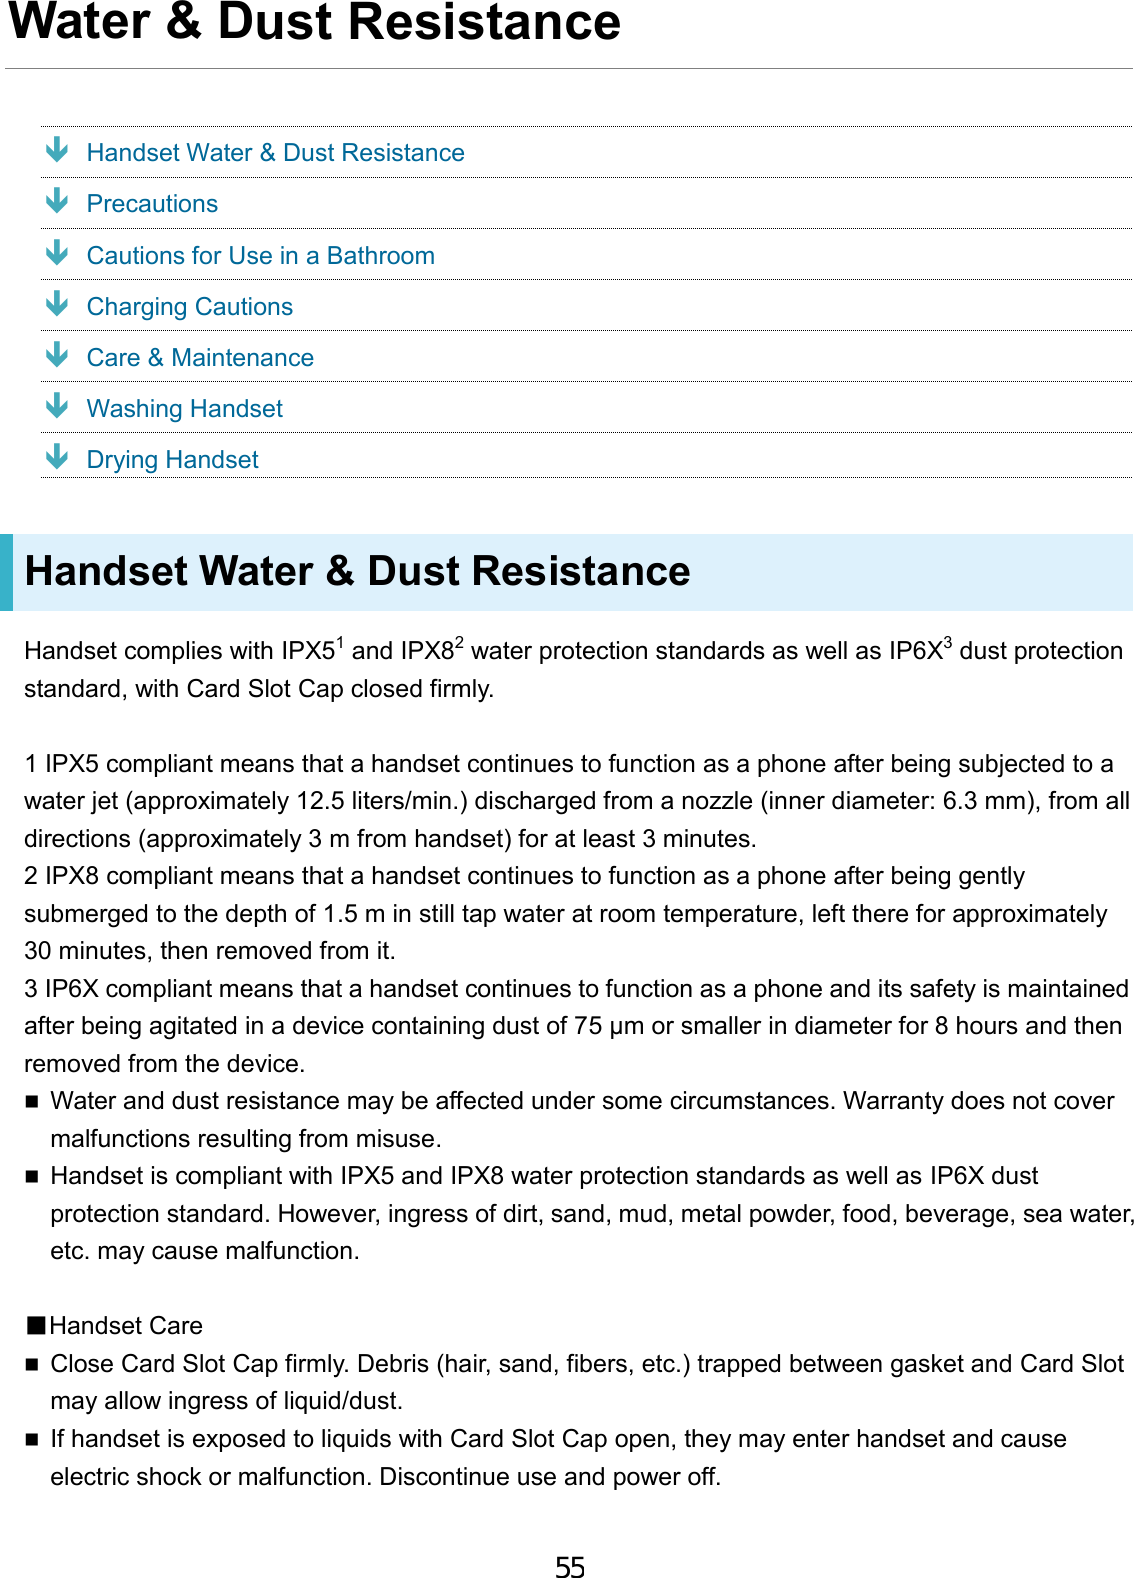 Water &amp; Dust Resistance  Handset Water &amp; Dust Resistance  Precautions  Cautions for Use in a Bathroom  Charging Cautions  Care &amp; Maintenance  Washing Handset  Drying Handset Handset Water &amp; Dust Resistance Handset complies with IPX51 and IPX82 water protection standards as well as IP6X3 dust protection standard, with Card Slot Cap closed firmly. 1 IPX5 compliant means that a handset continues to function as a phone after being subjected to a water jet (approximately 12.5 liters/min.) discharged from a nozzle (inner diameter: 6.3 mm), from all directions (approximately 3 m from handset) for at least 3 minutes. 2 IPX8 compliant means that a handset continues to function as a phone after being gently submerged to the depth of 1.5 m in still tap water at room temperature, left there for approximately 30 minutes, then removed from it. 3 IP6X compliant means that a handset continues to function as a phone and its safety is maintained after being agitated in a device containing dust of 75 μm or smaller in diameter for 8 hours and then removed from the device. Water and dust resistance may be affected under some circumstances. Warranty does not covermalfunctions resulting from misuse.Handset is compliant with IPX5 and IPX8 water protection standards as well as IP6X dustprotection standard. However, ingress of dirt, sand, mud, metal powder, food, beverage, sea water,etc. may cause malfunction.■Handset CareClose Card Slot Cap firmly. Debris (hair, sand, fibers, etc.) trapped between gasket and Card Slotmay allow ingress of liquid/dust.If handset is exposed to liquids with Card Slot Cap open, they may enter handset and causeelectric shock or malfunction. Discontinue use and power off.55